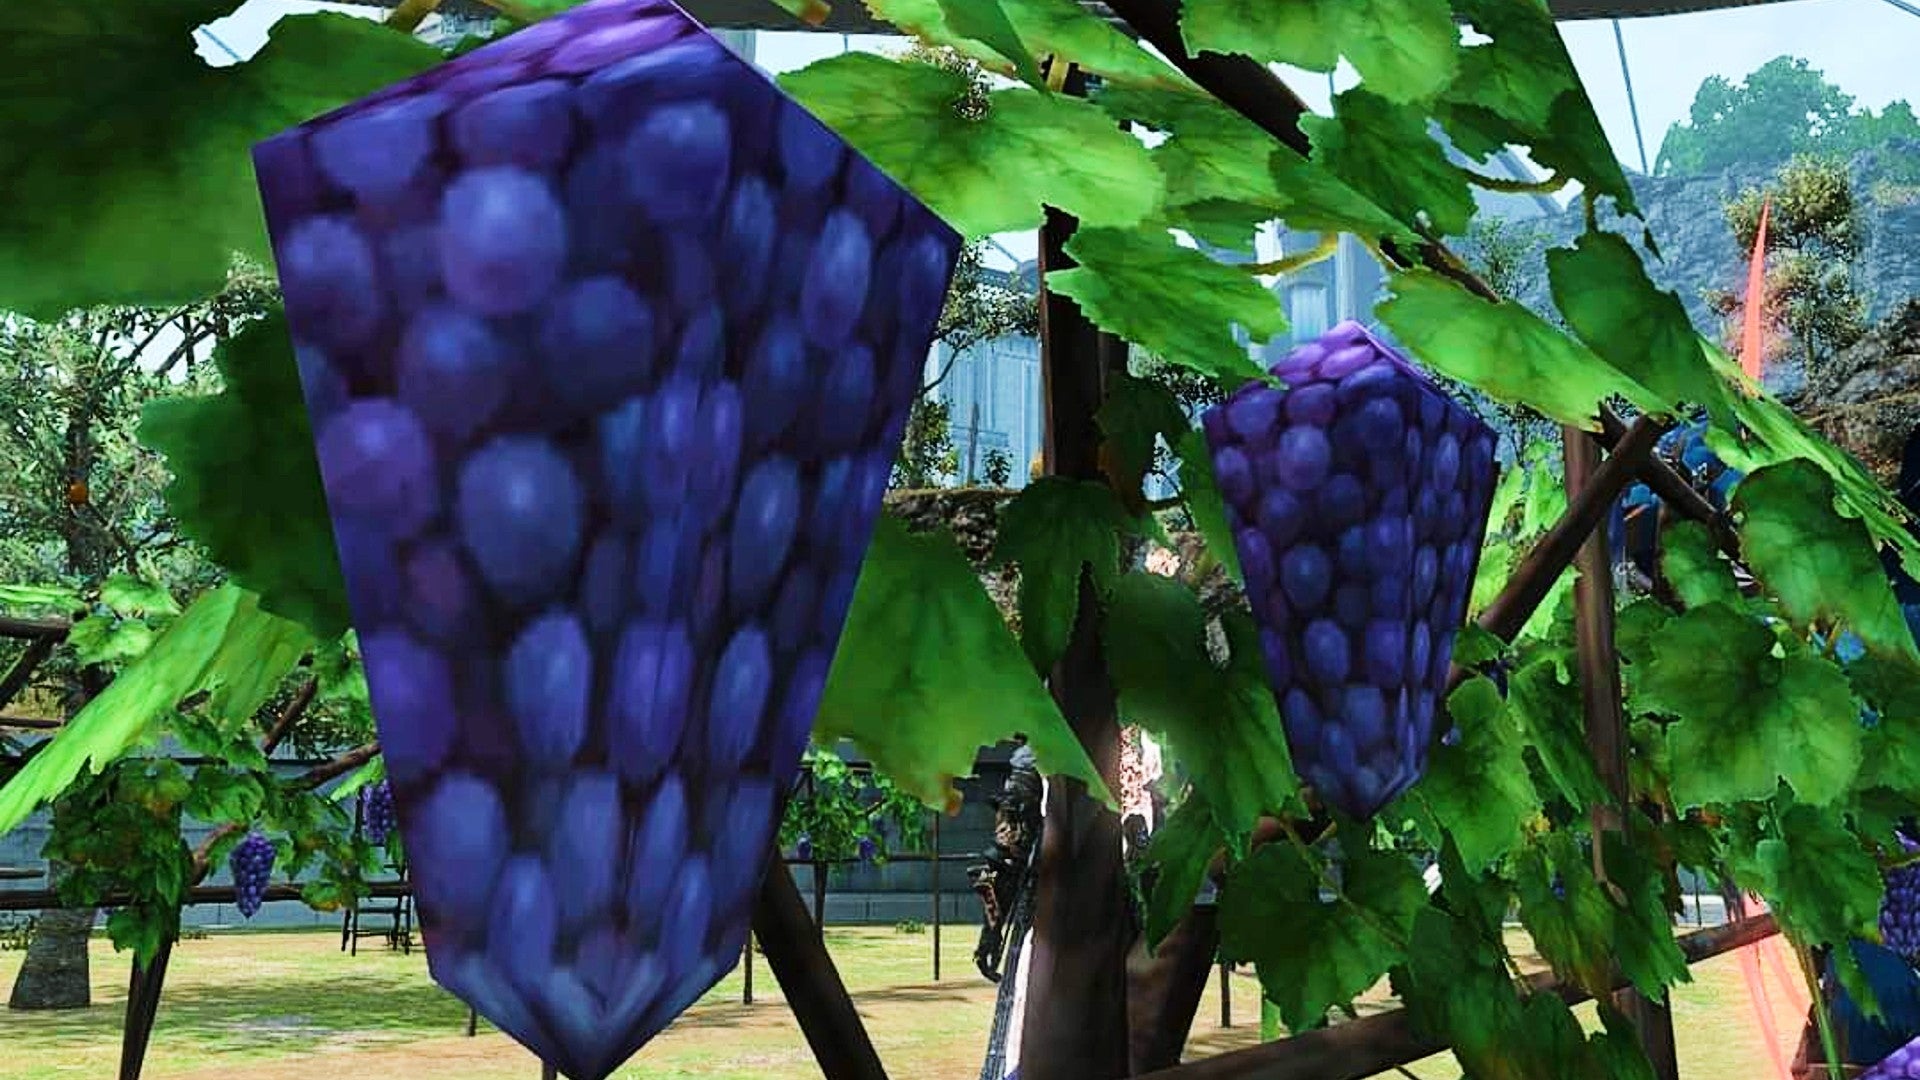 Image for Square Enix updates the low-poly grapes from Final Fantasy 14, saddening millions